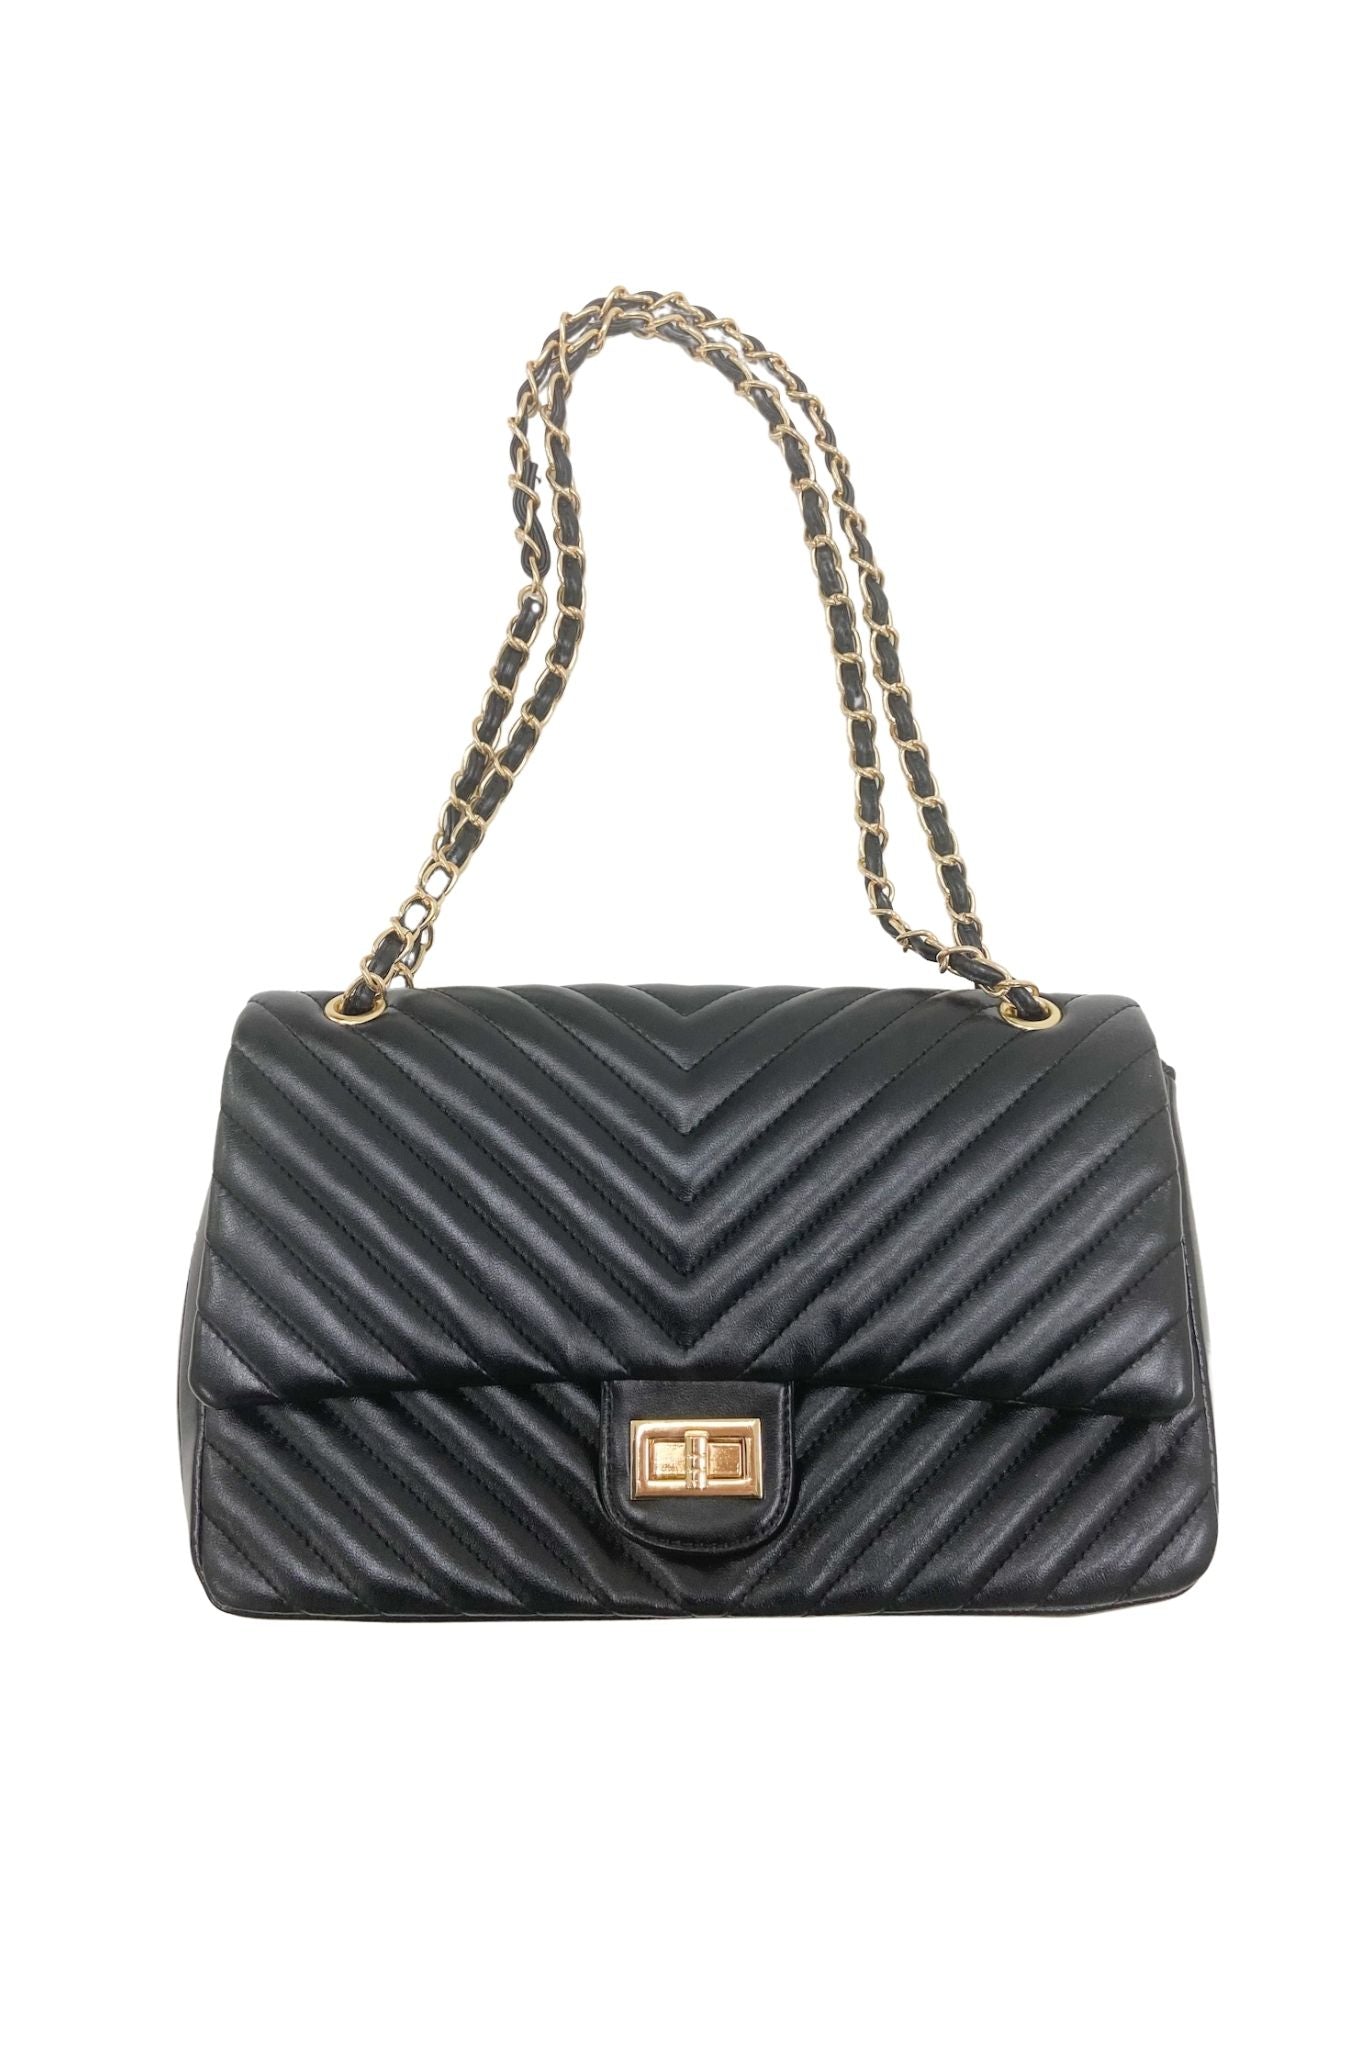 black diagonal quilted bag w/ chain, affordable accessories, trendy handbags, shop style your senses by Mallory Fitzsimmons 